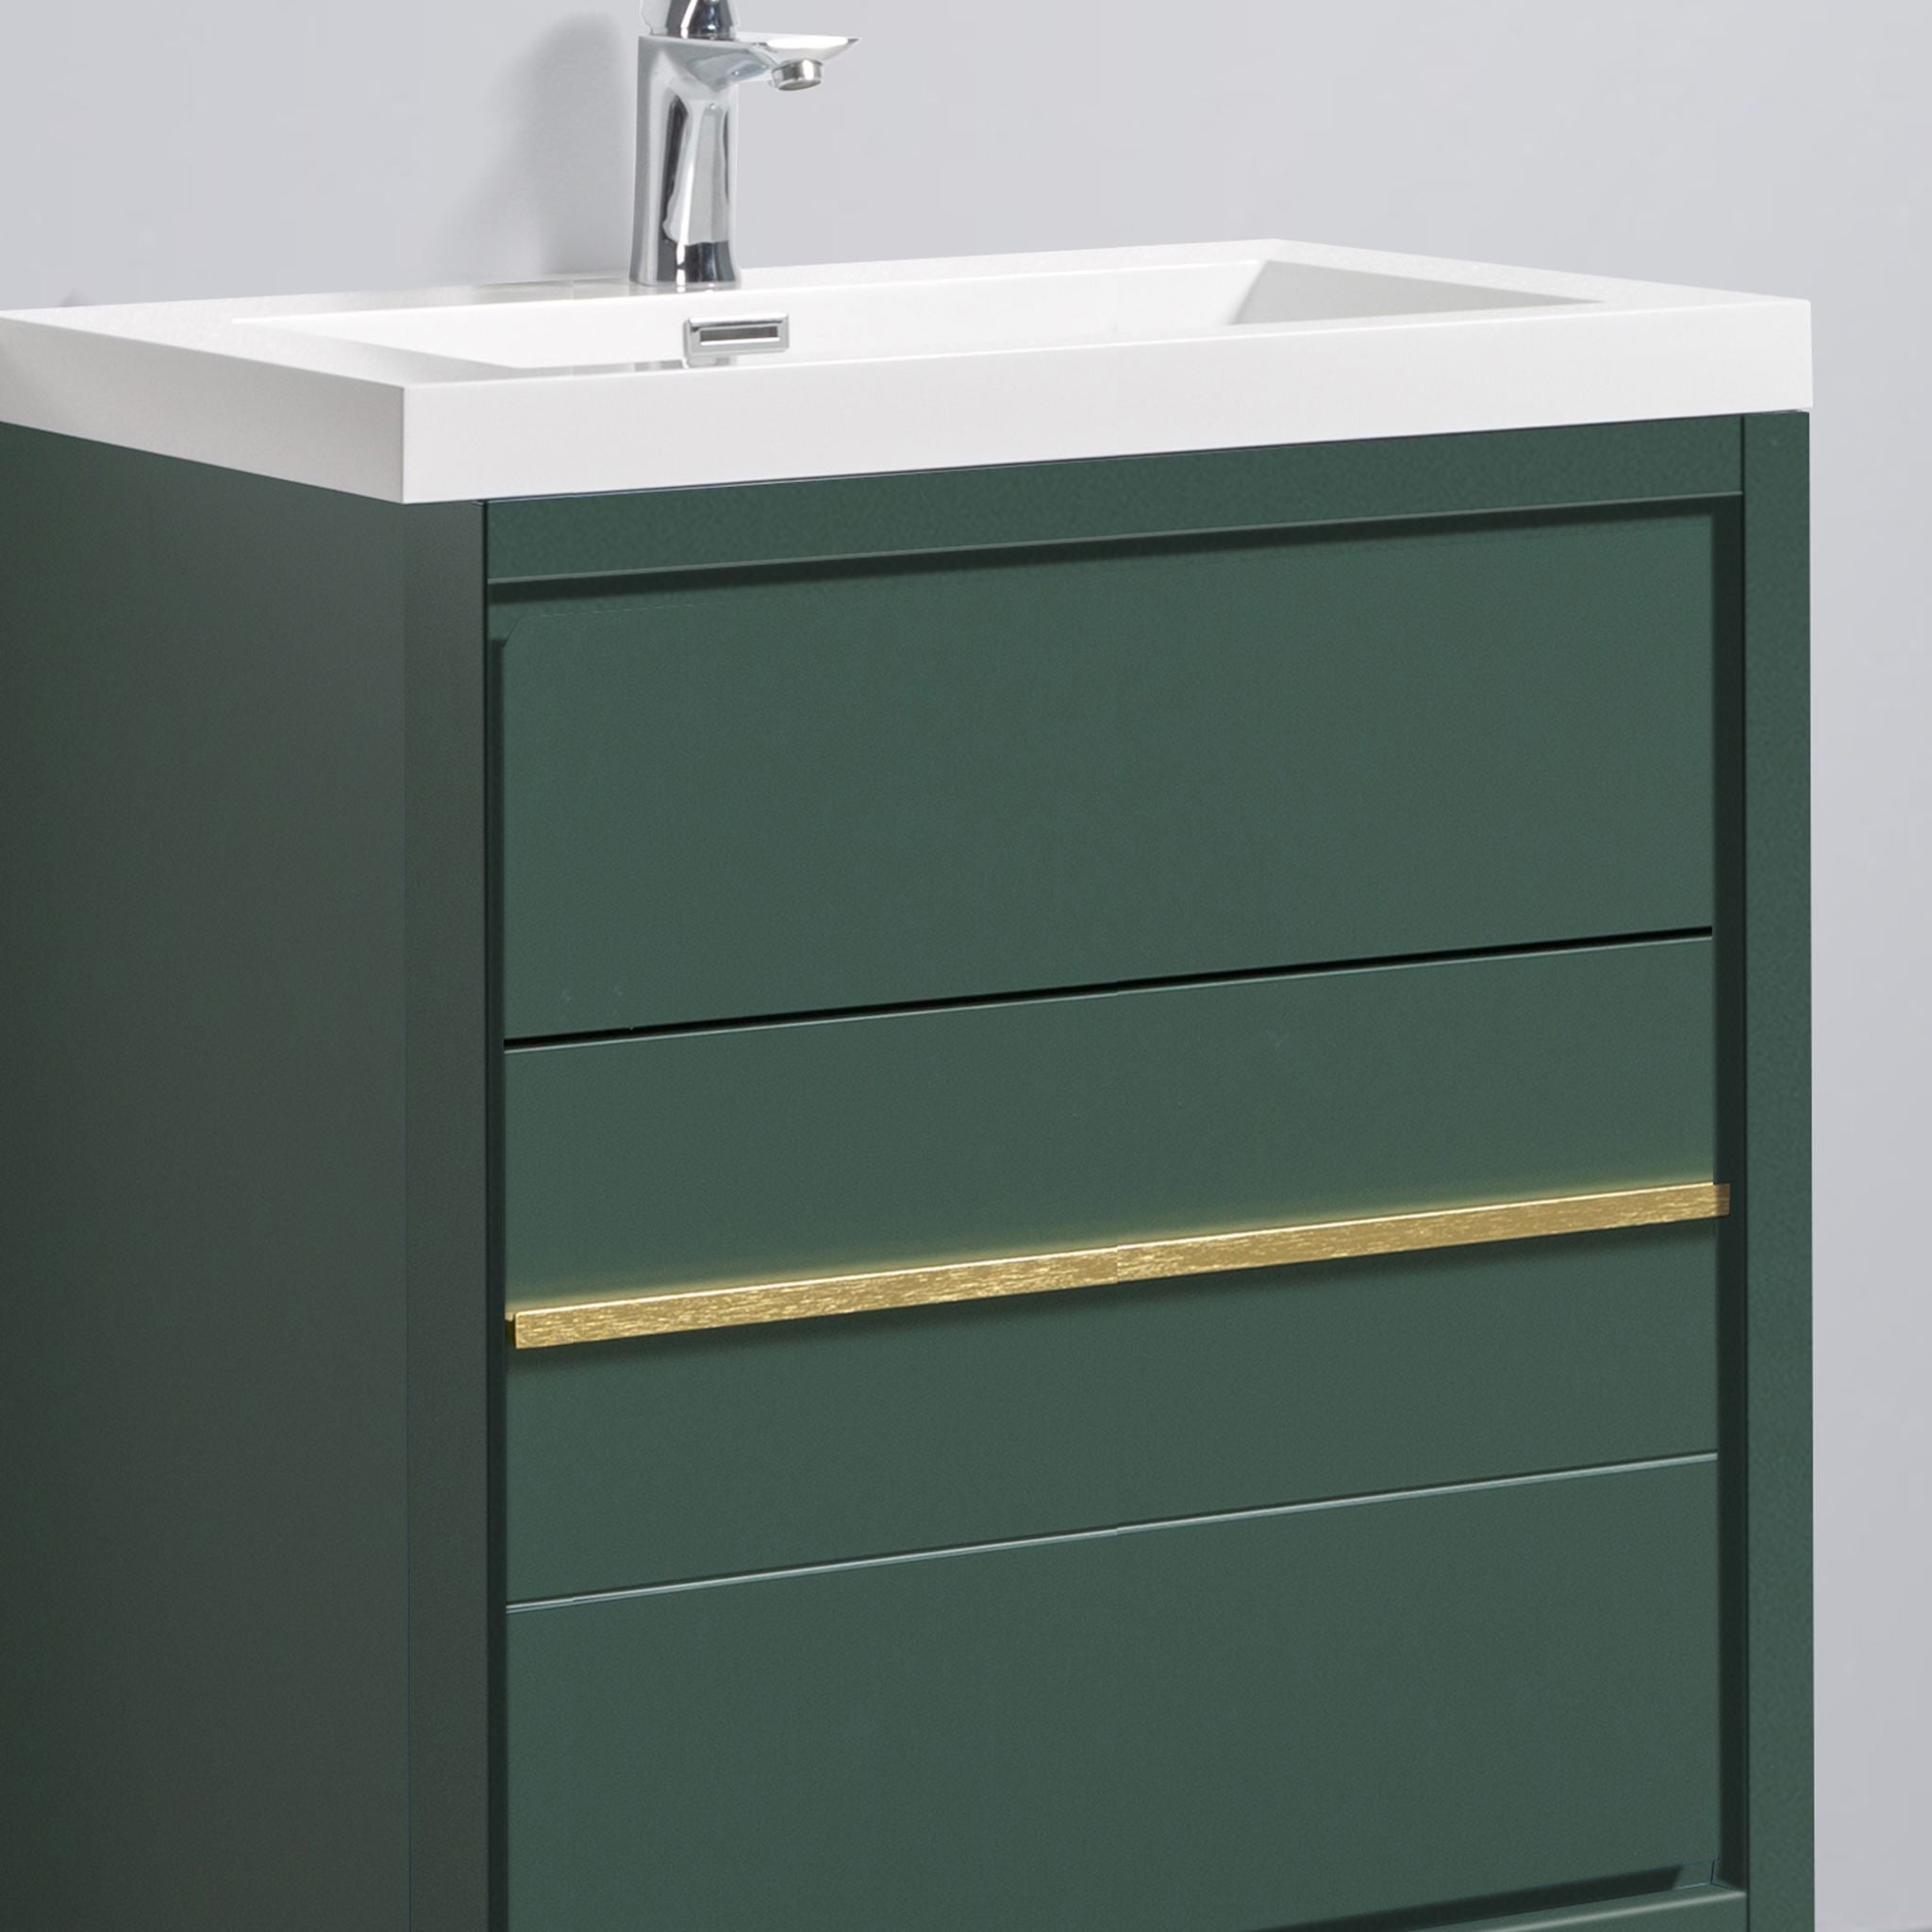 Granada 29.5 Nordic Green With Brush Gold Handle Cabinet, Square Cultured Marble Sink, Free Standing Modern Vanity Set